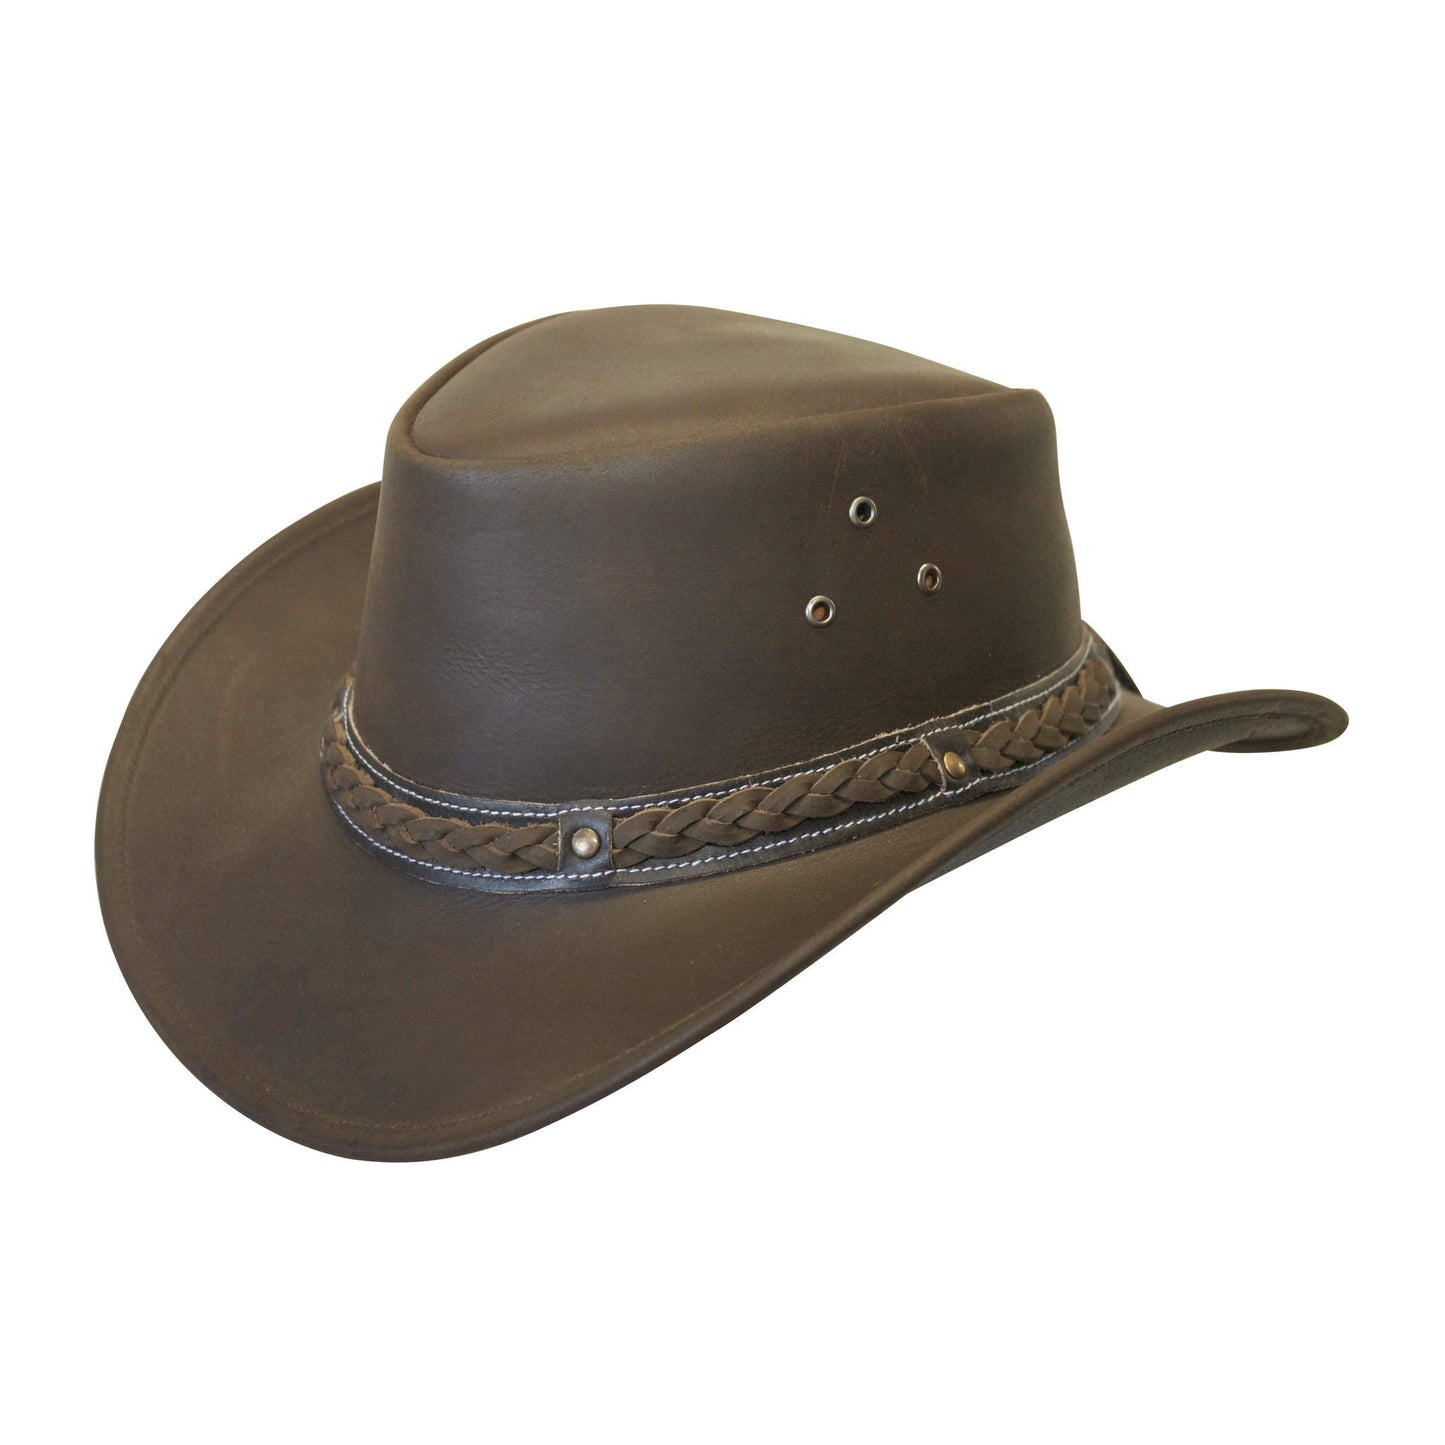 Outback leather hat in color Brown with three eyelets for ventilation and sewn on braided hat band for a unique look